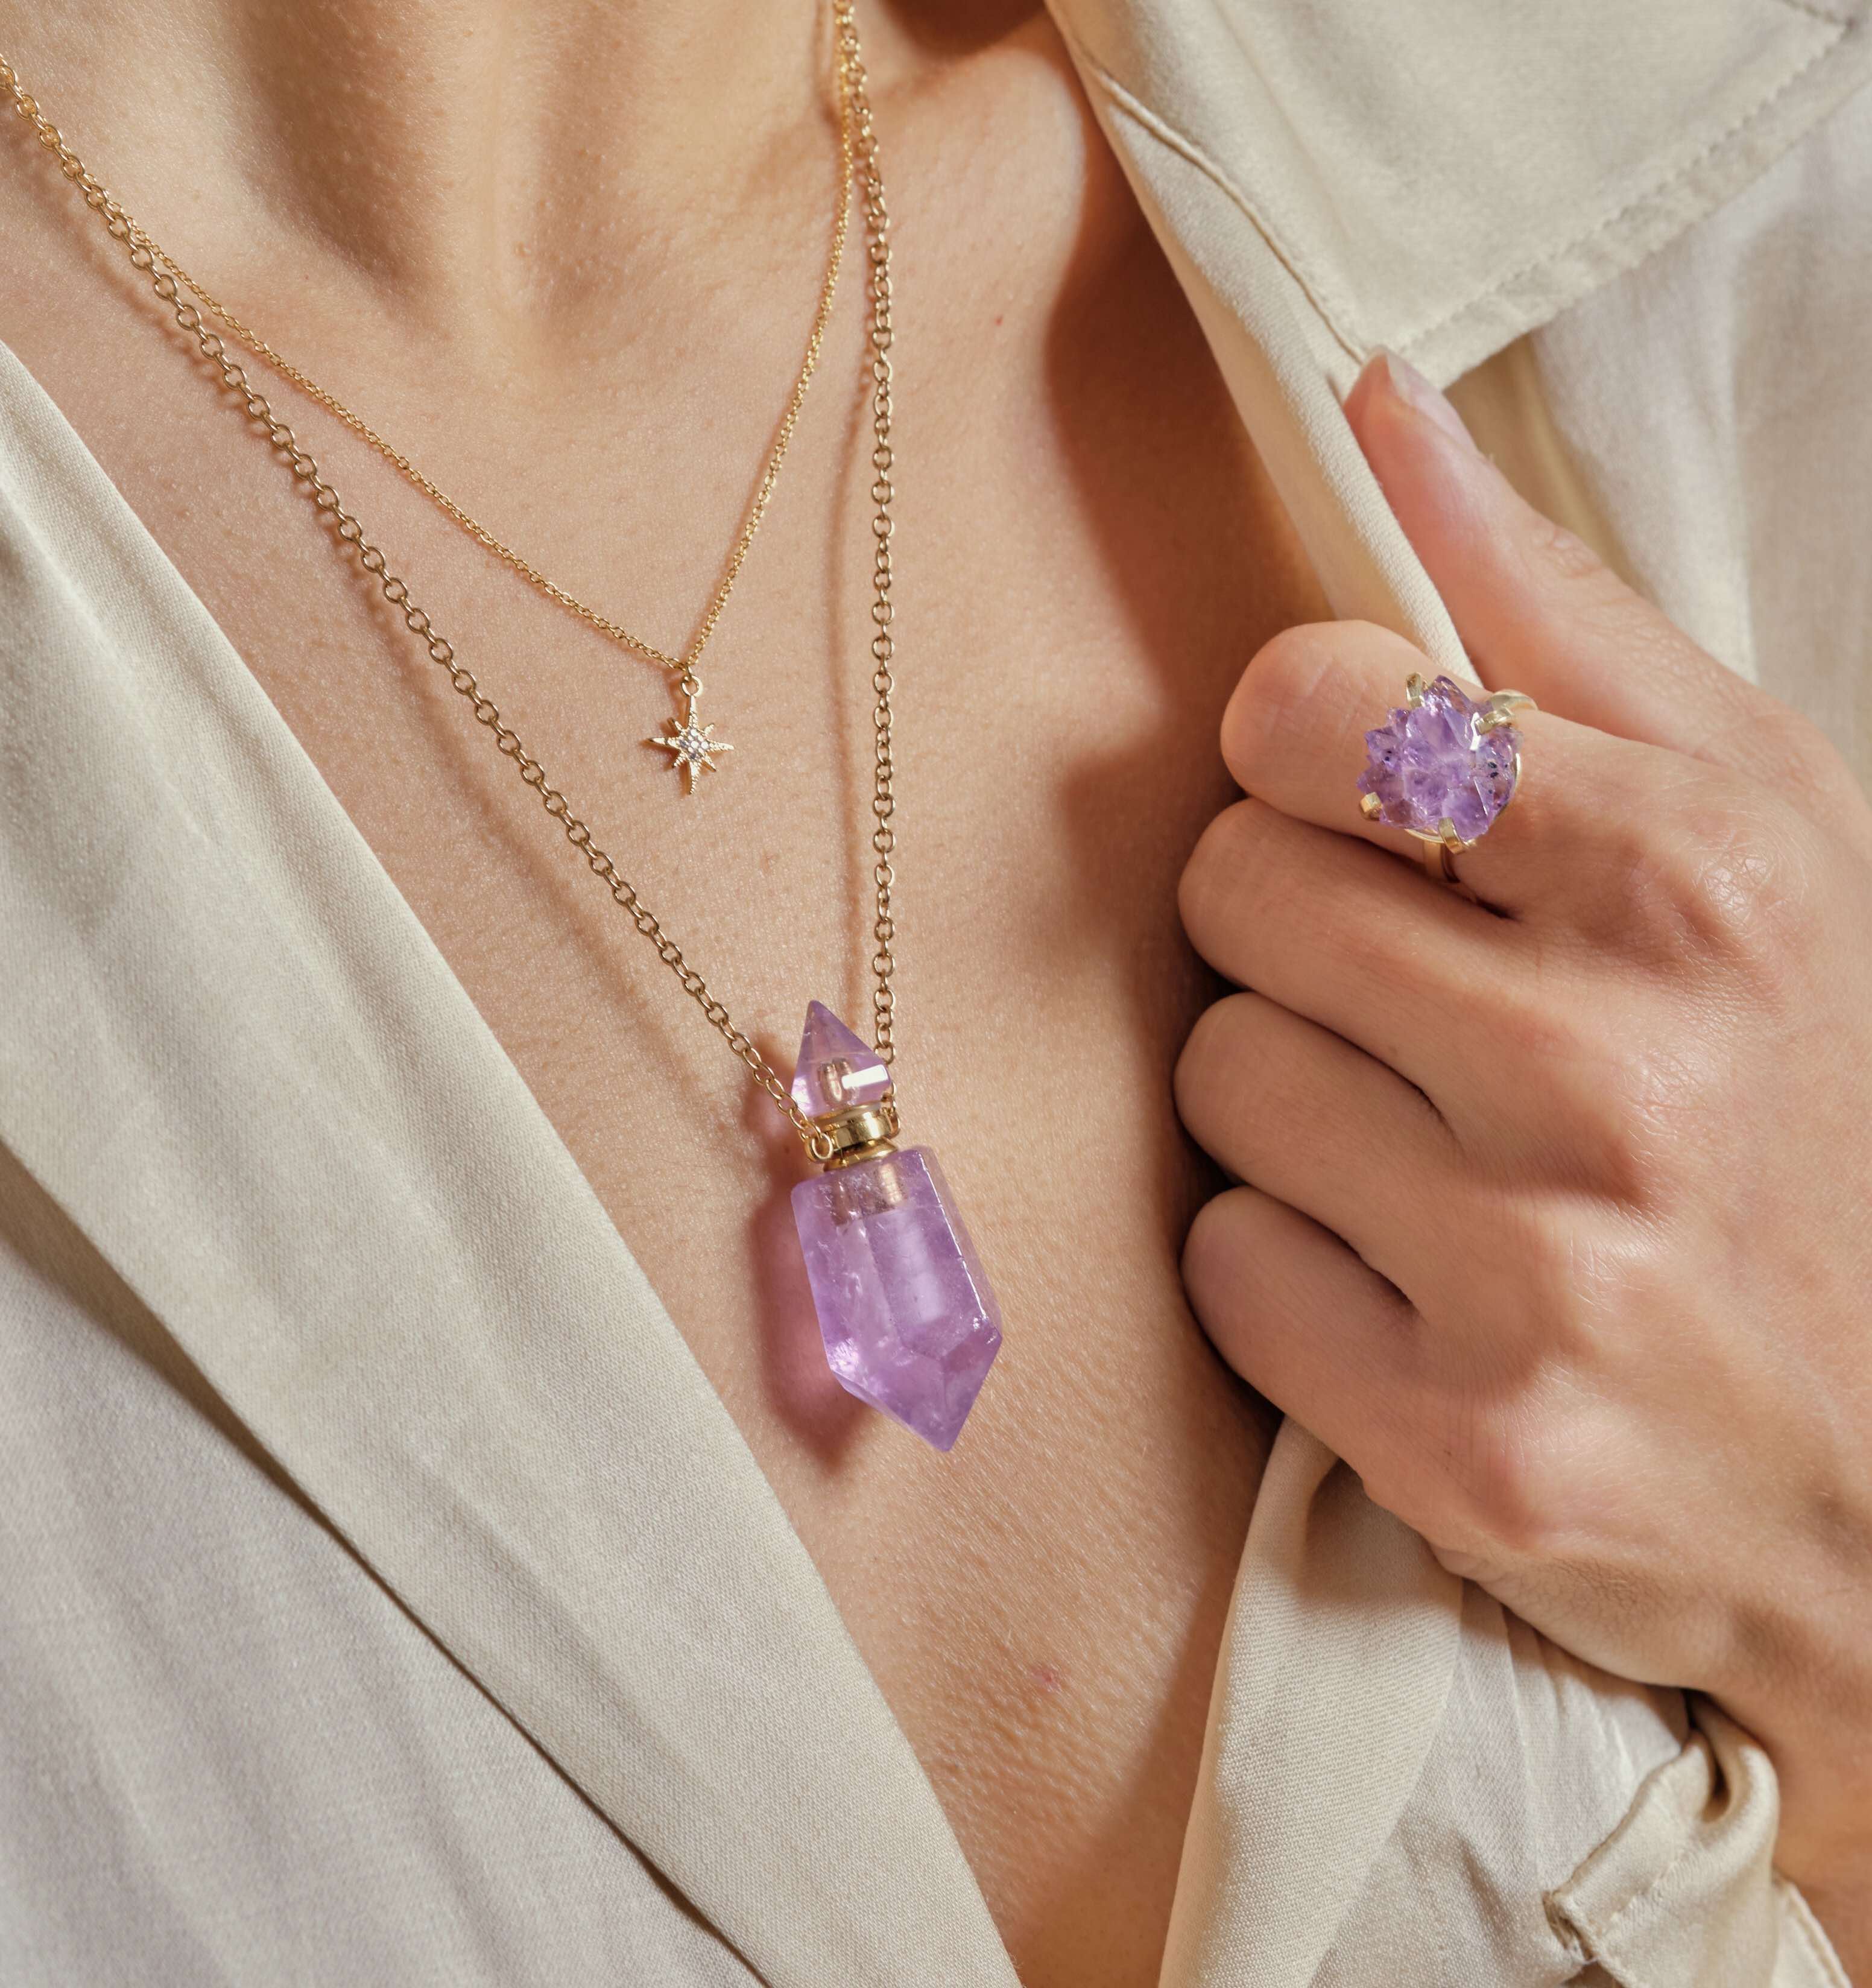 Crystal Jewelry made with a touch of magic